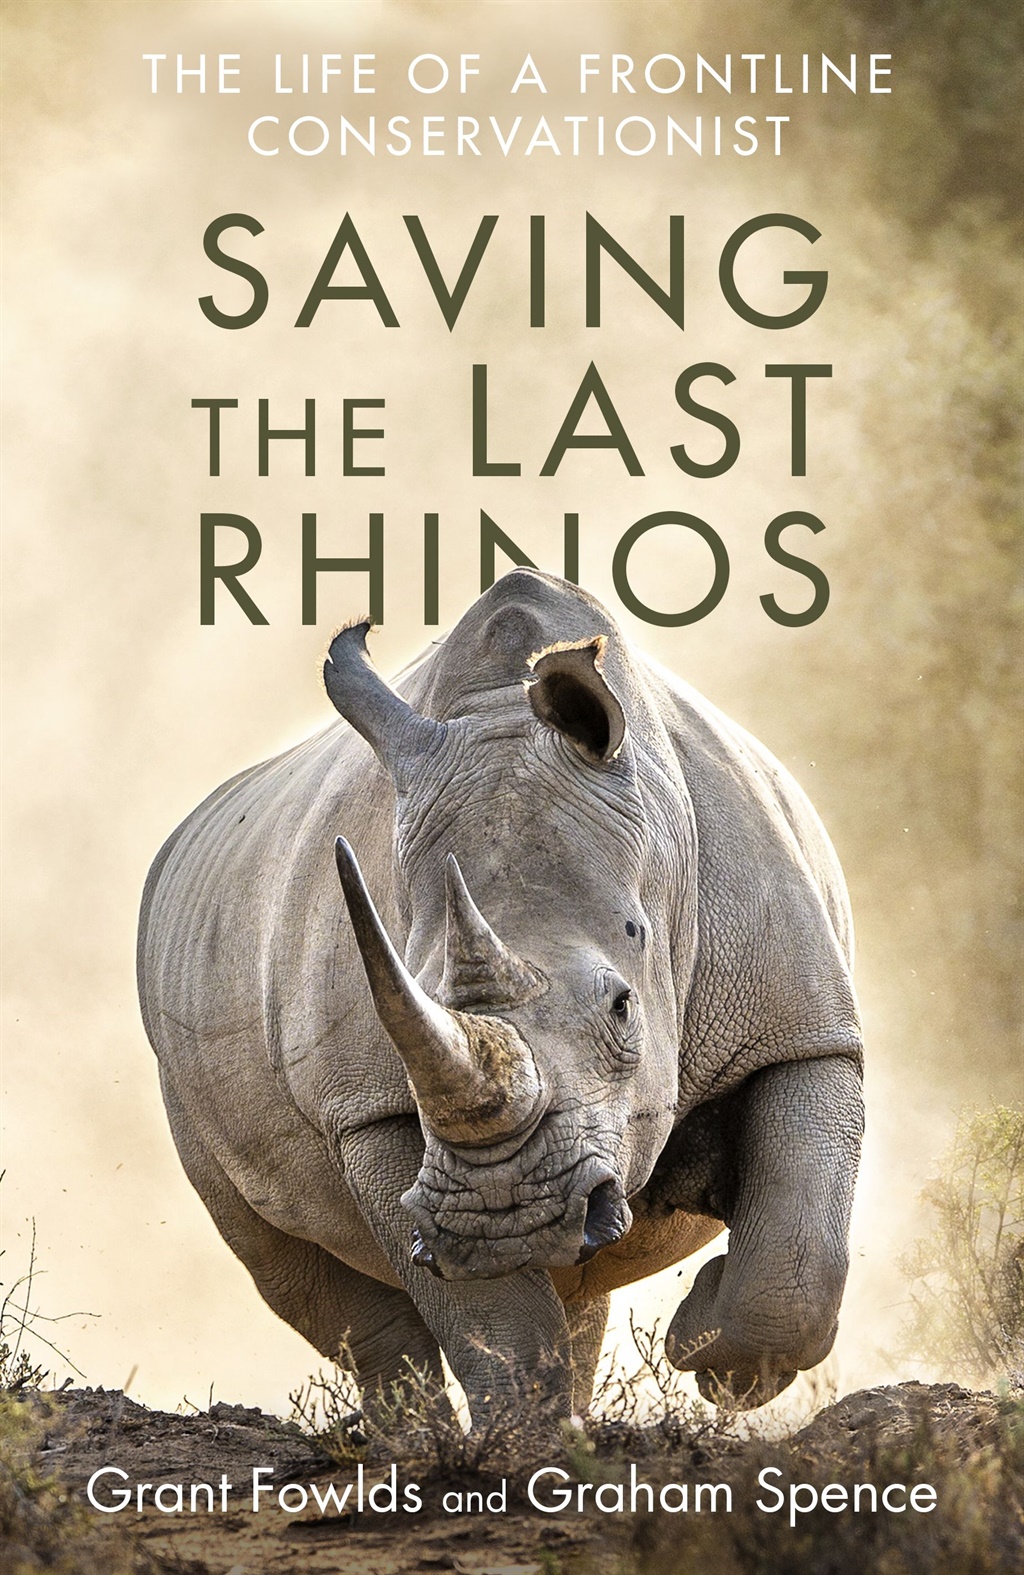 Saving the last rhinos: The life of a frontline conservationist by Grant Fowlds and Graham Spence, published by Jonathan Ball Publishers.